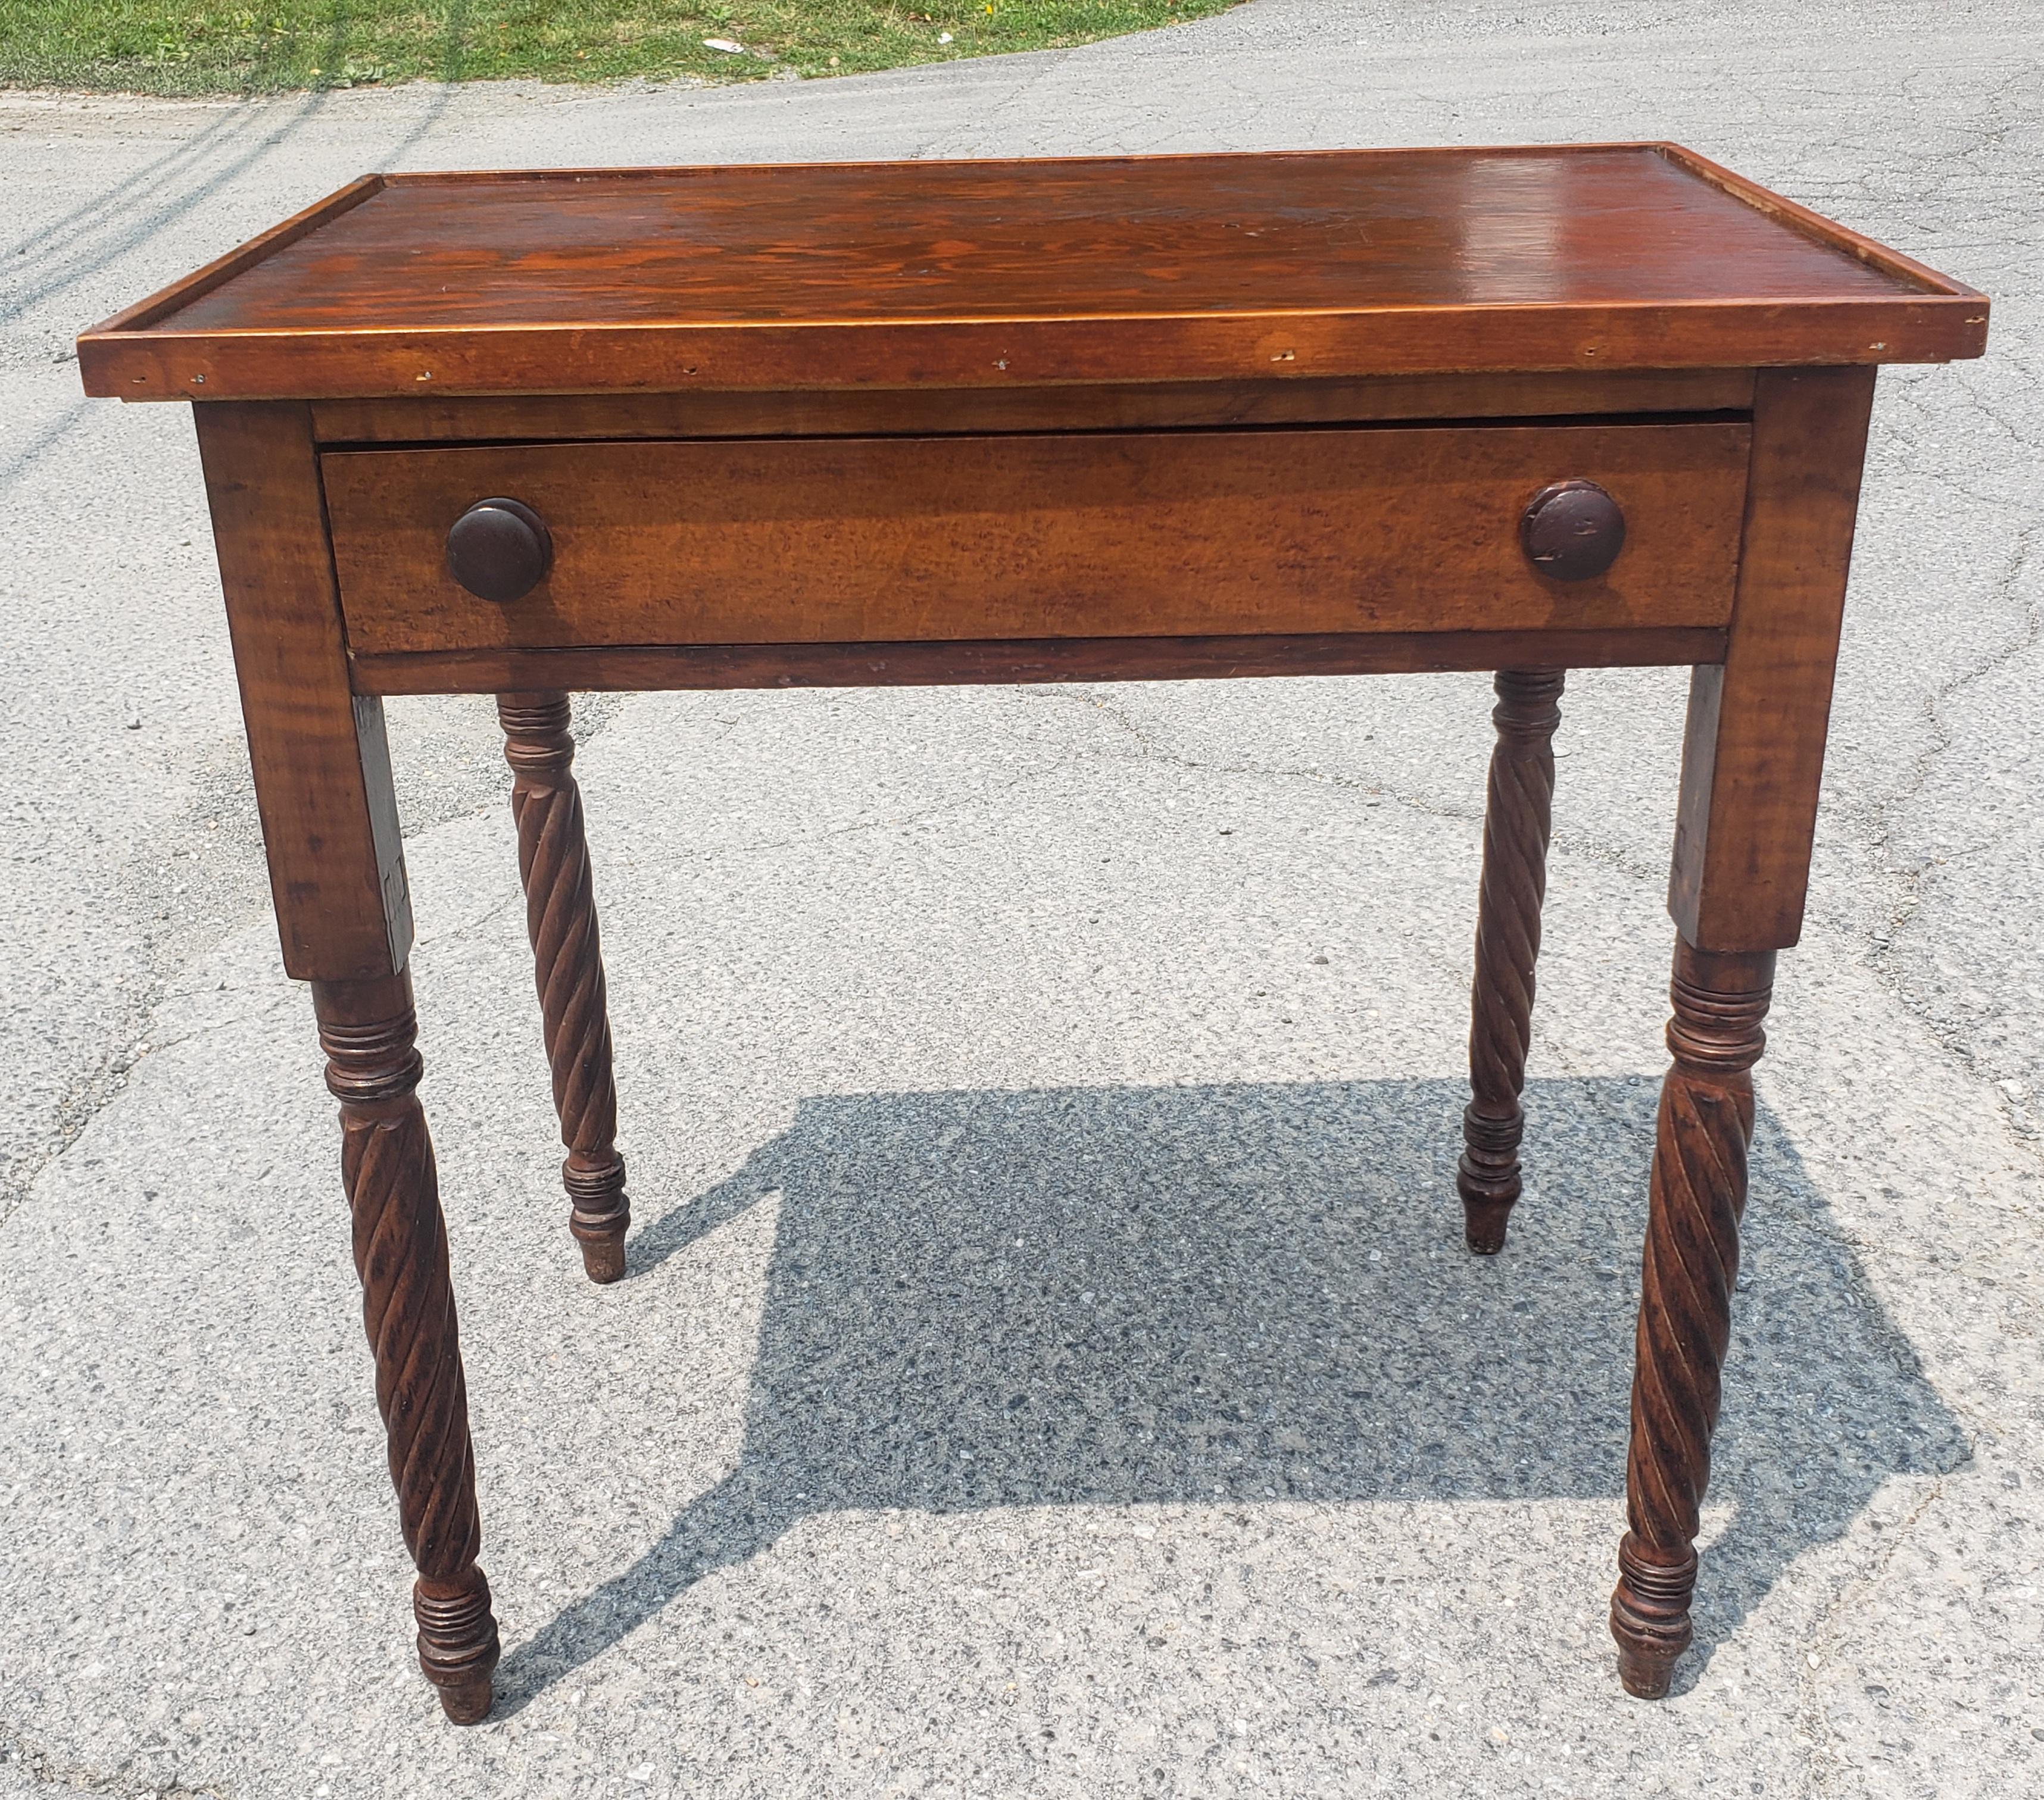 An Early American Style Pine and Maple Spiral-Turned Legs Single Drawer Work Table. Very sturdy.